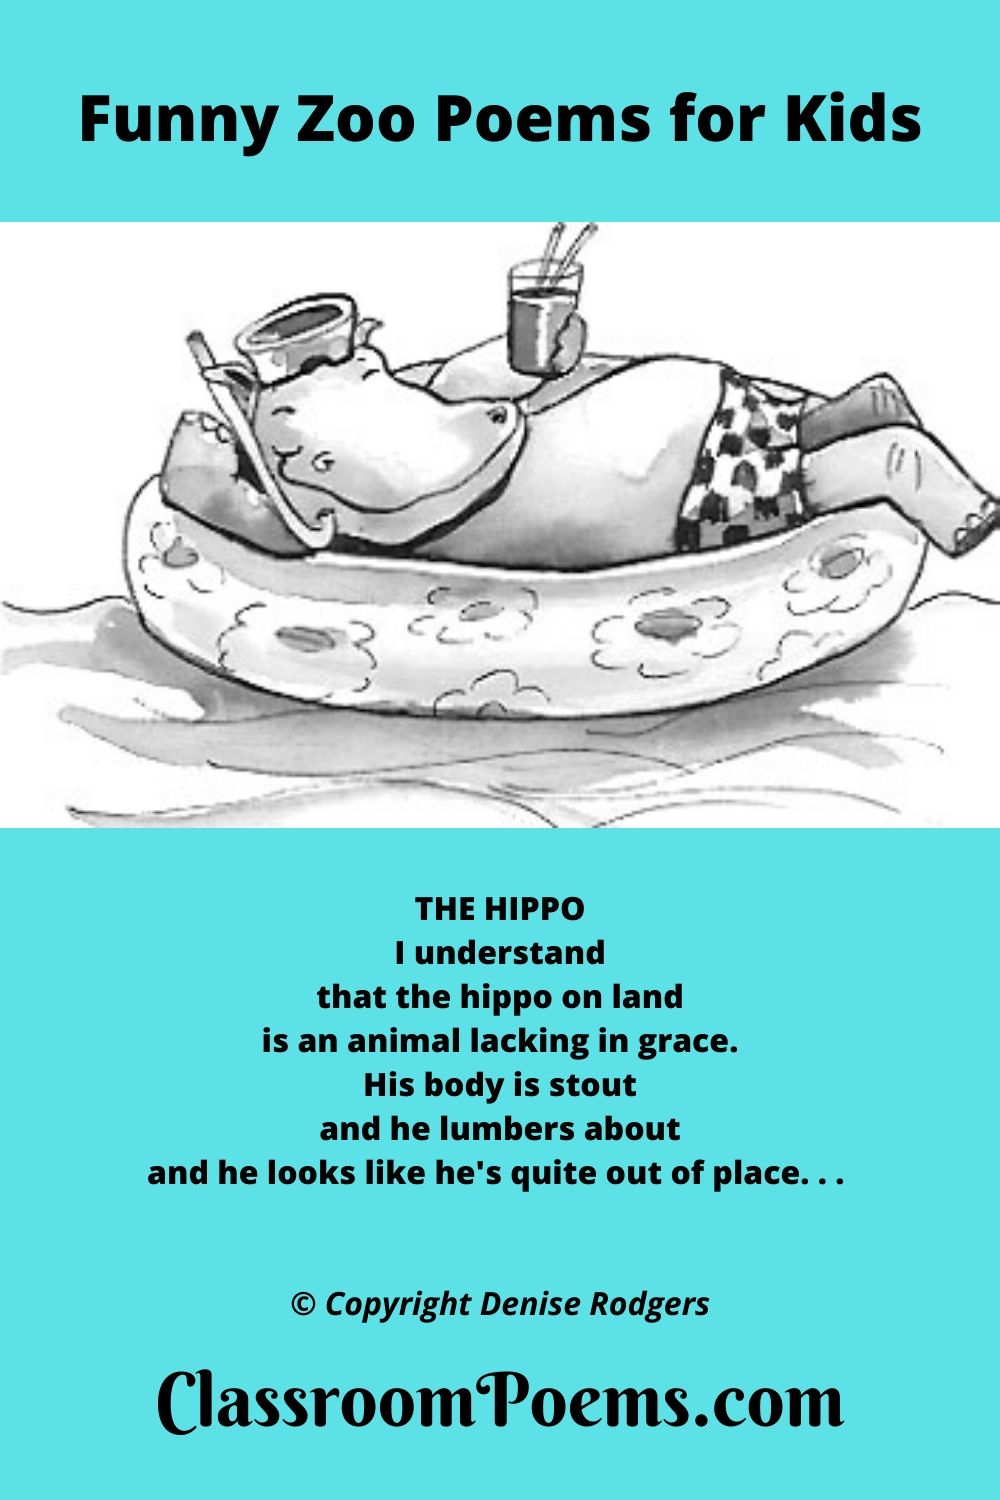 Hippo Poem. Floating hippo. Funny hippo poem by Denise Rodgers on ClassroomPoems.com.